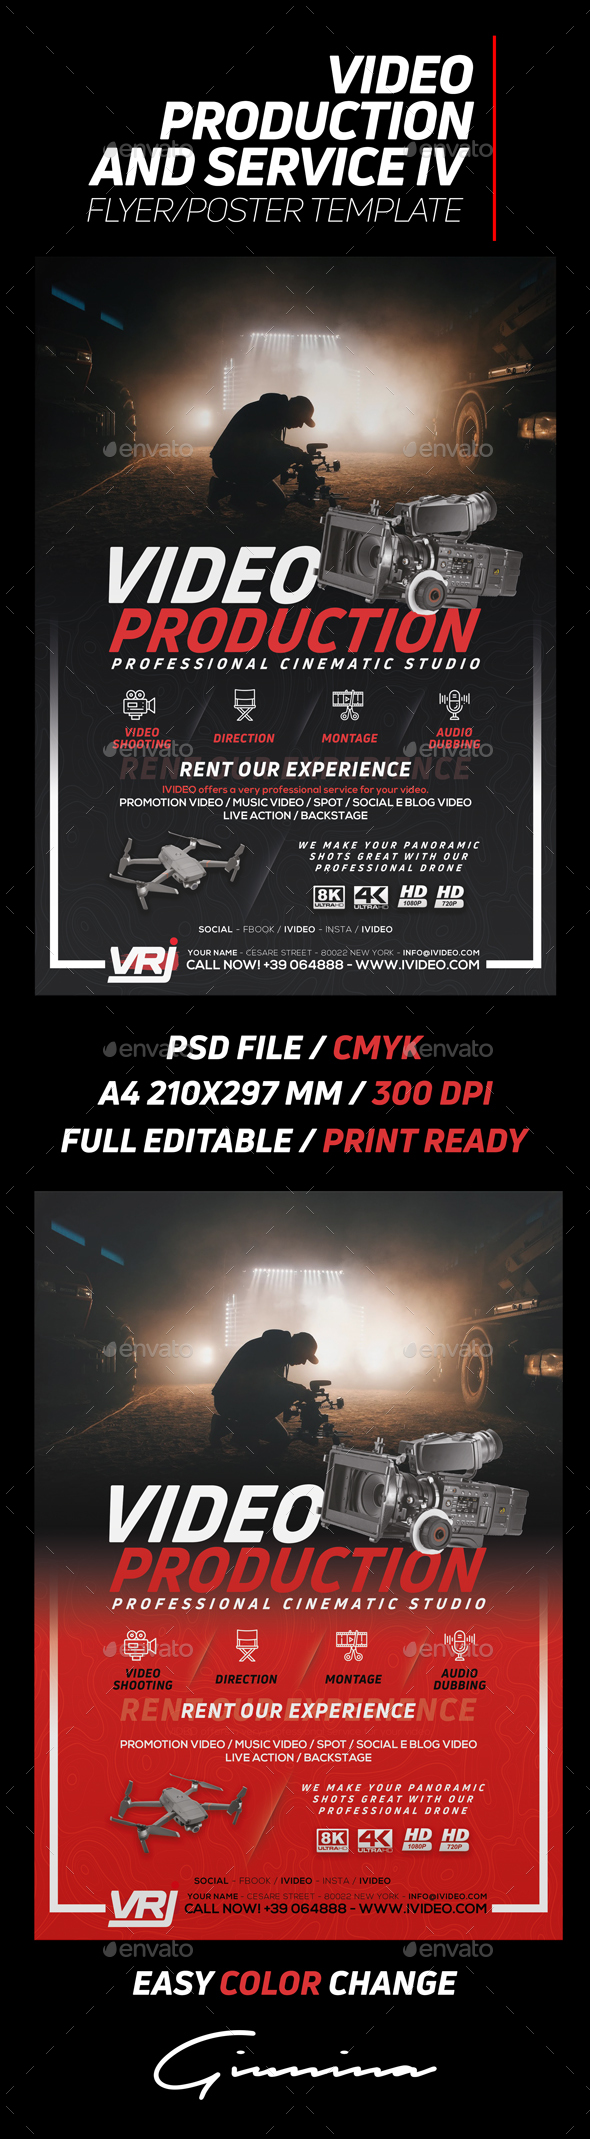 Video Production And Services 4 Flyer/Poster